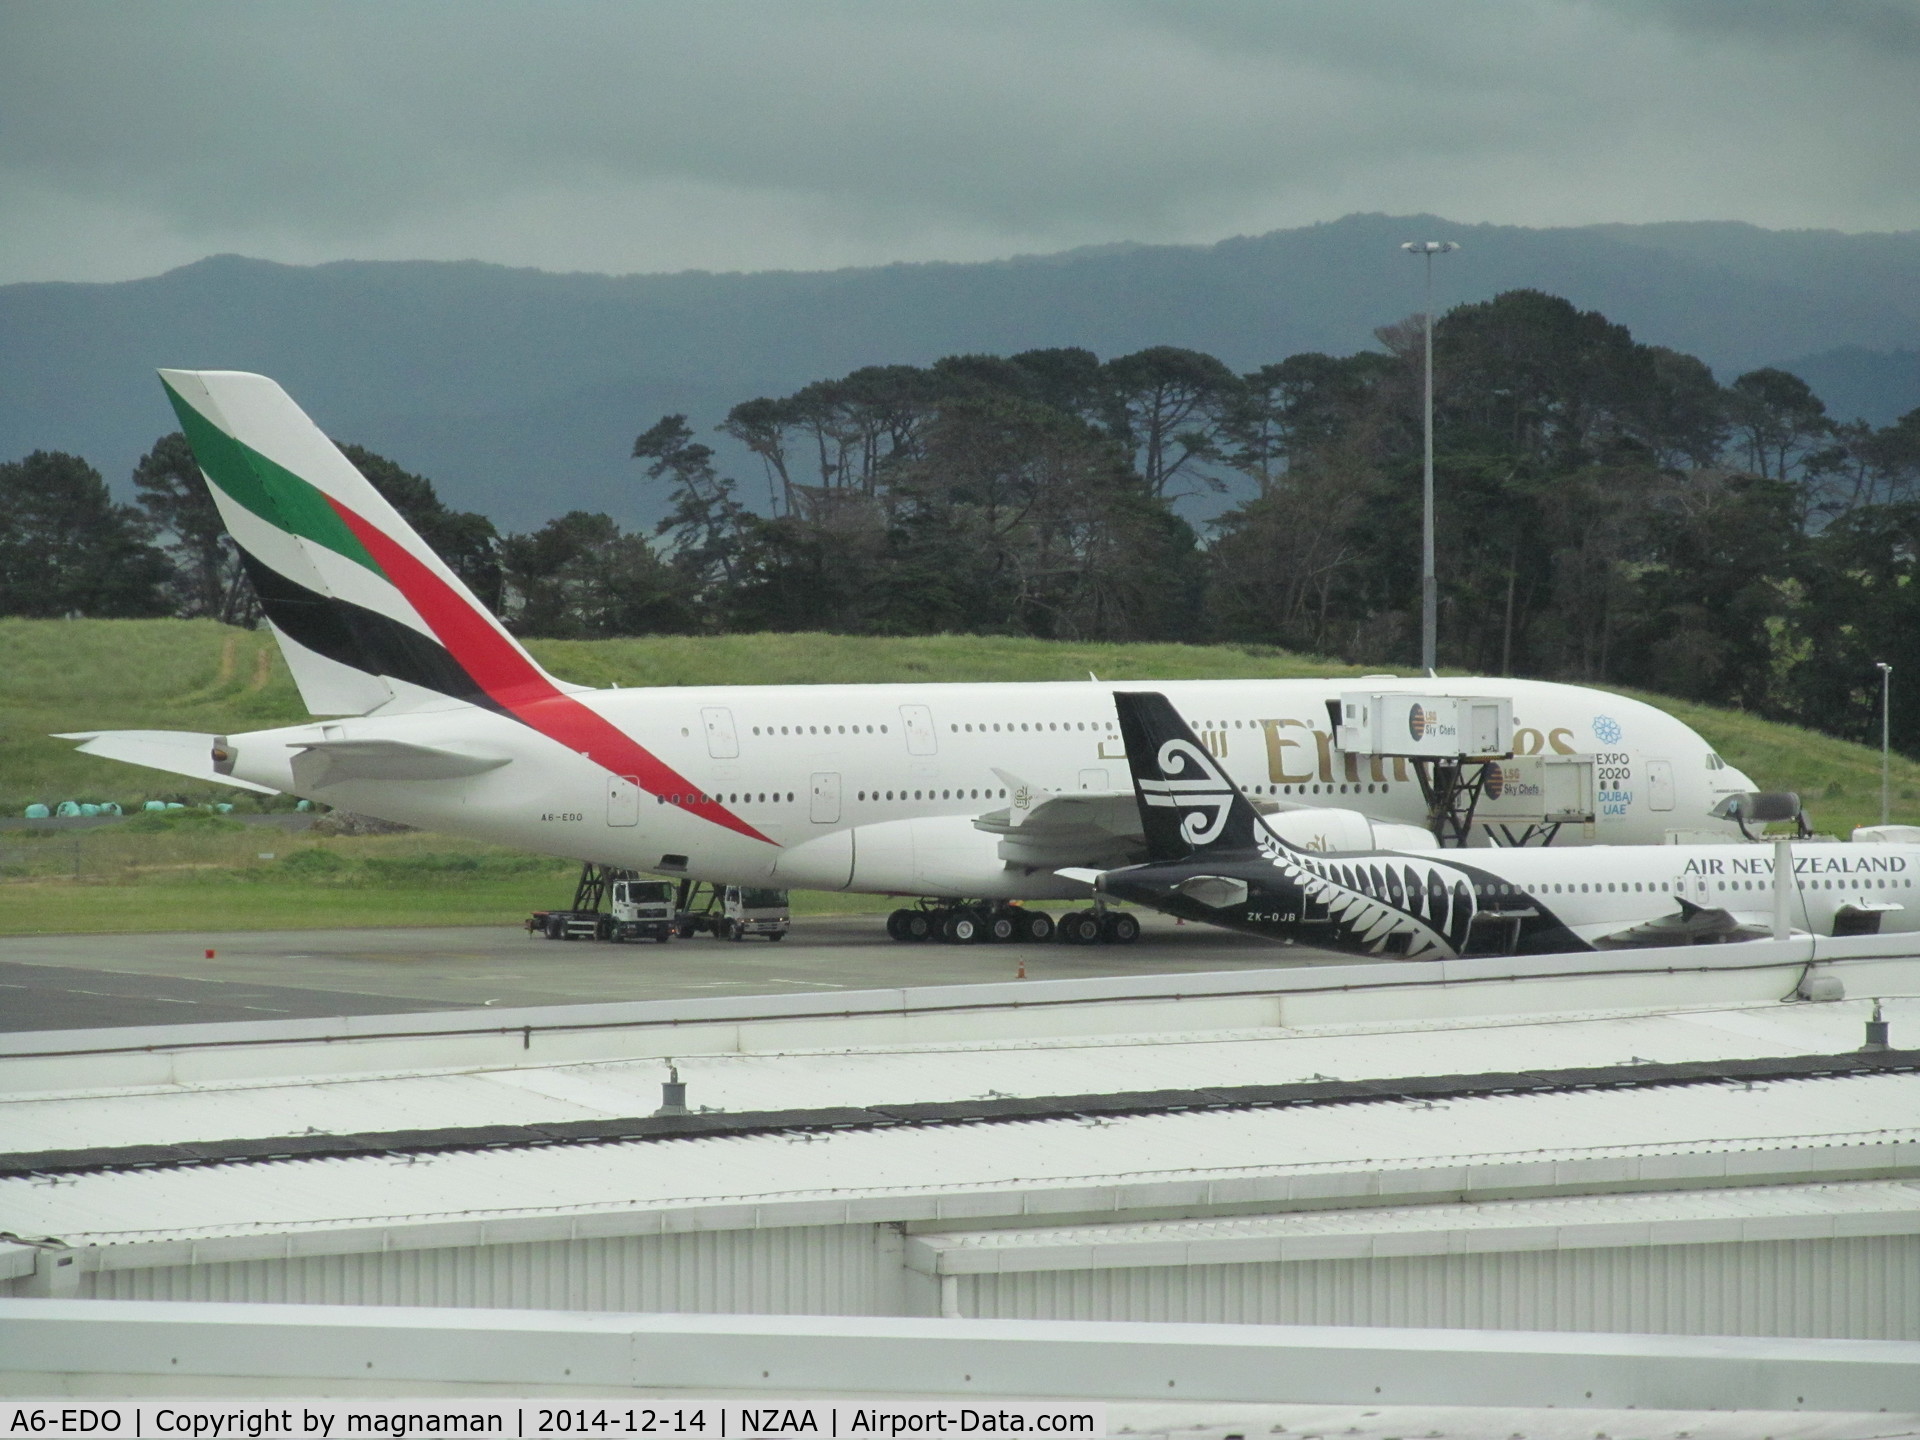 A6-EDO, 2010 Airbus A380-861 C/N 057, on apron - taken through glass from observation gallery